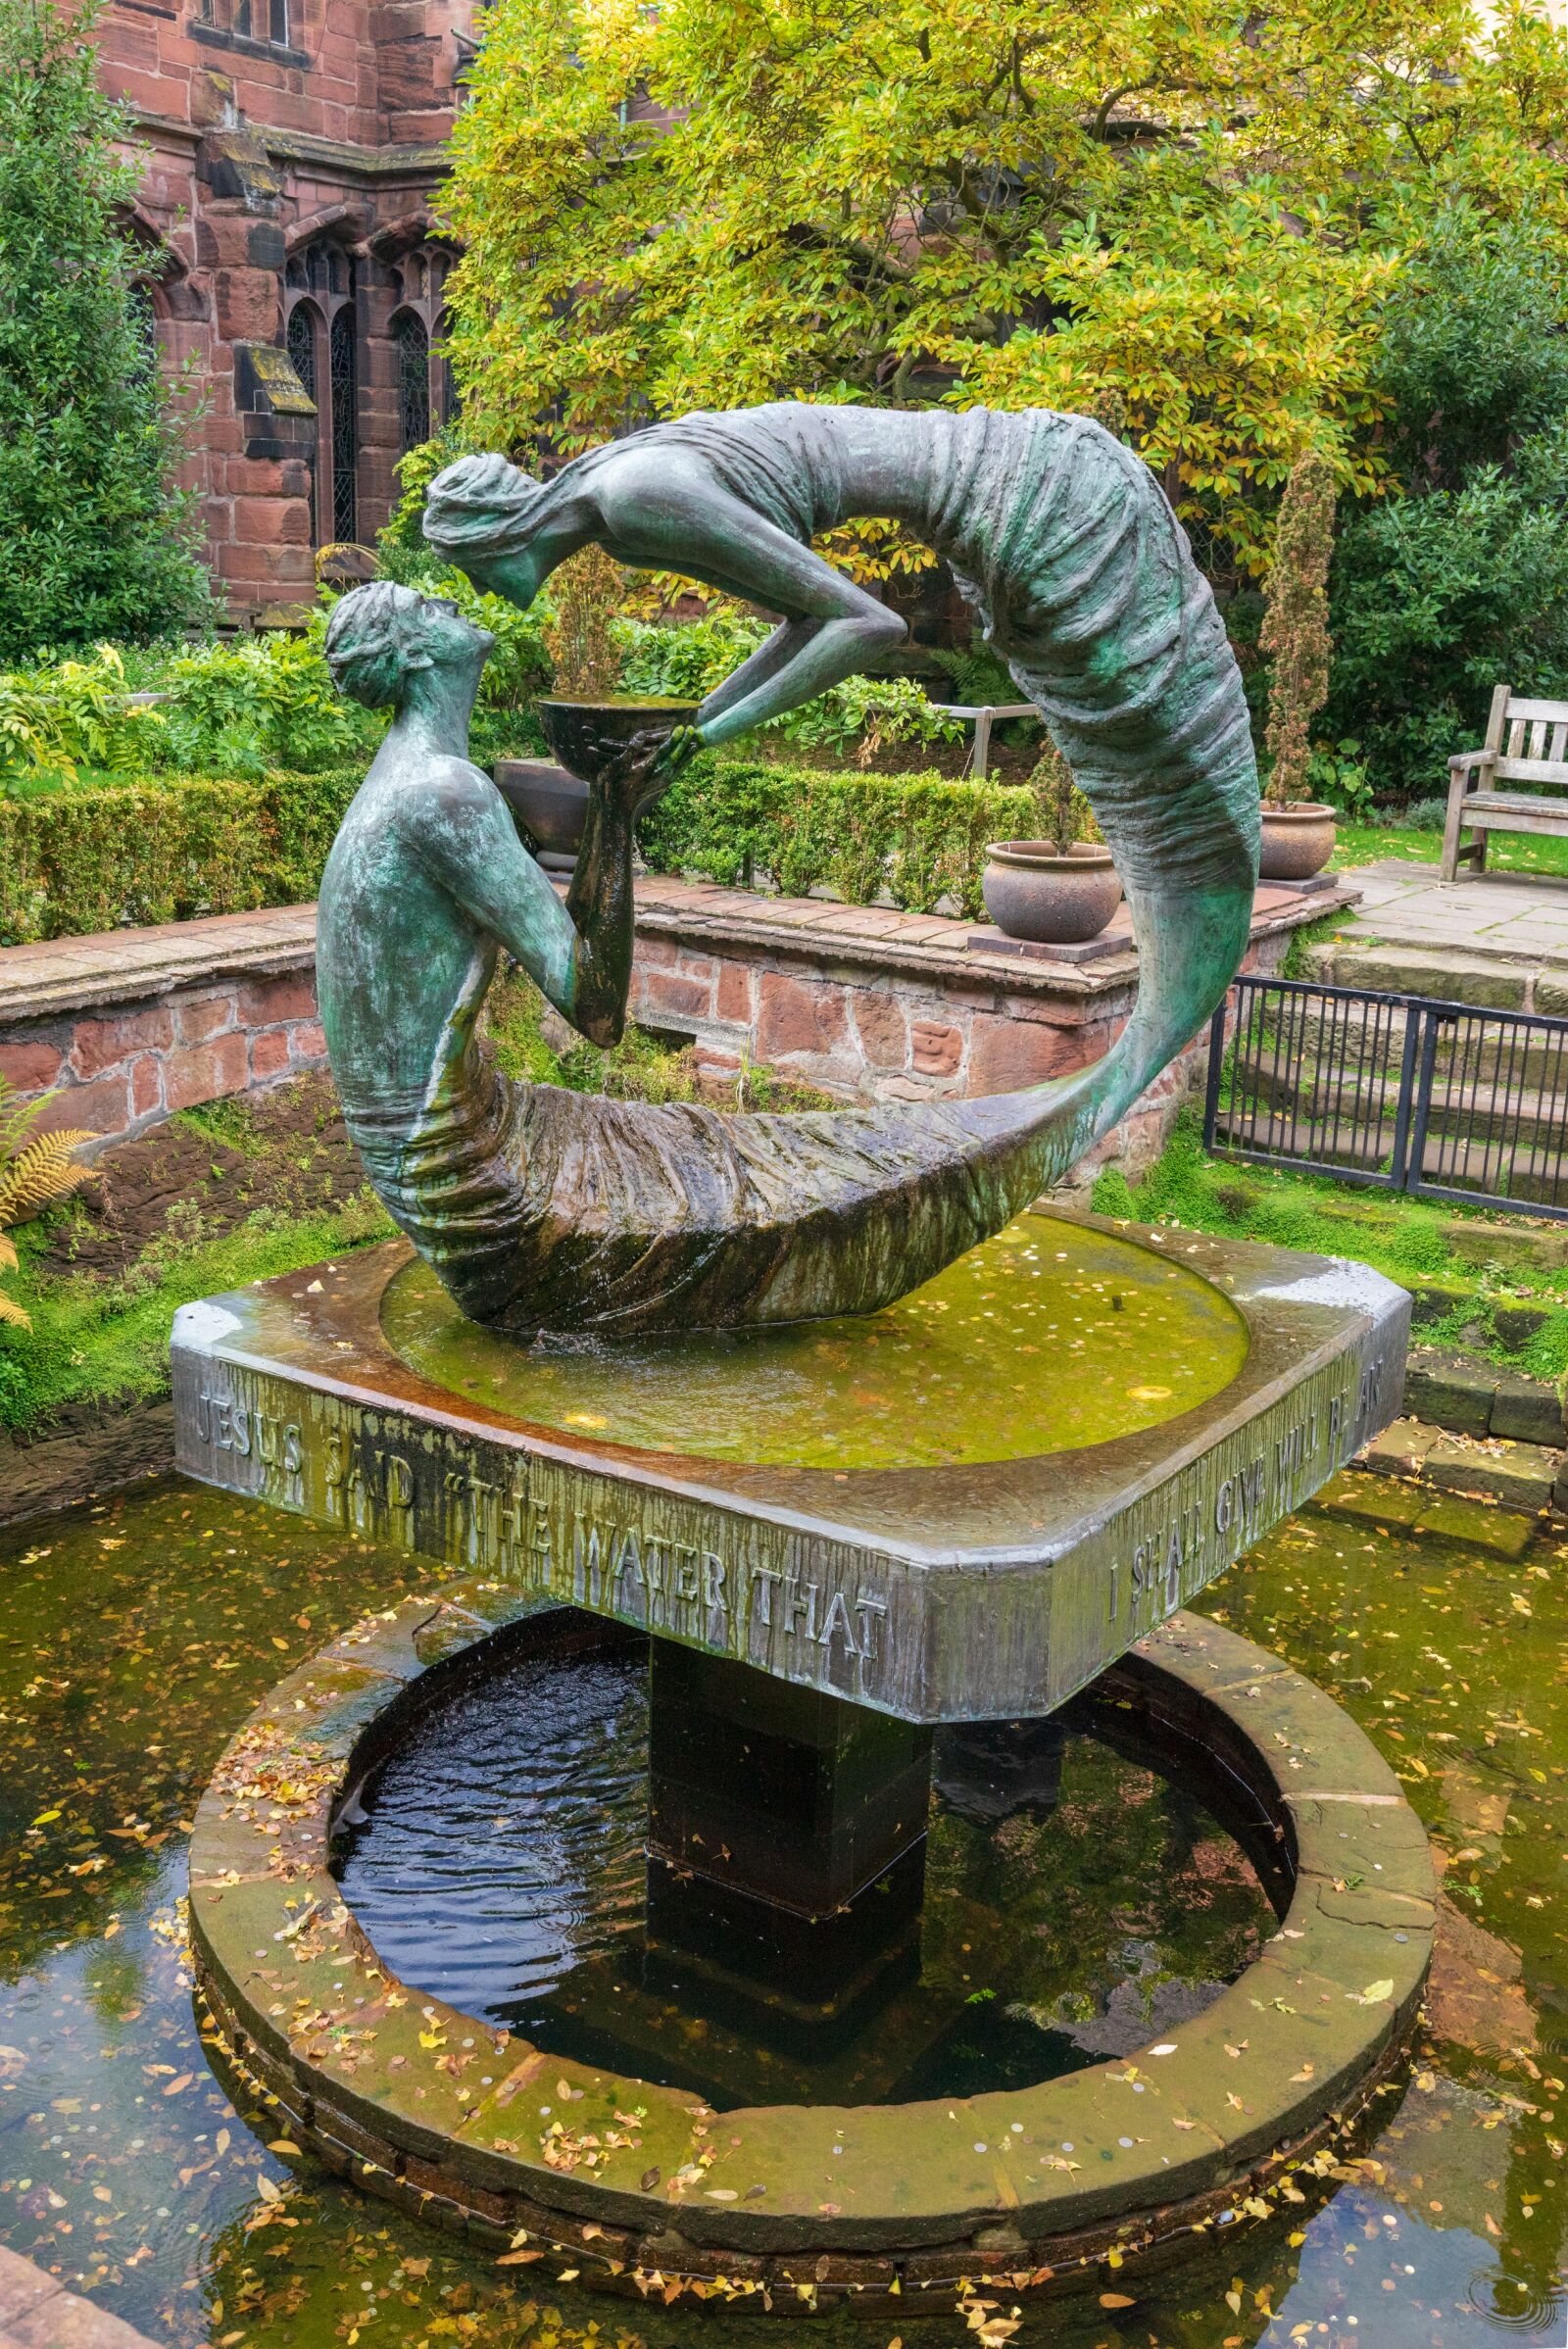 Sony a7R sample photo. Statue, chester cathedral, garden photography